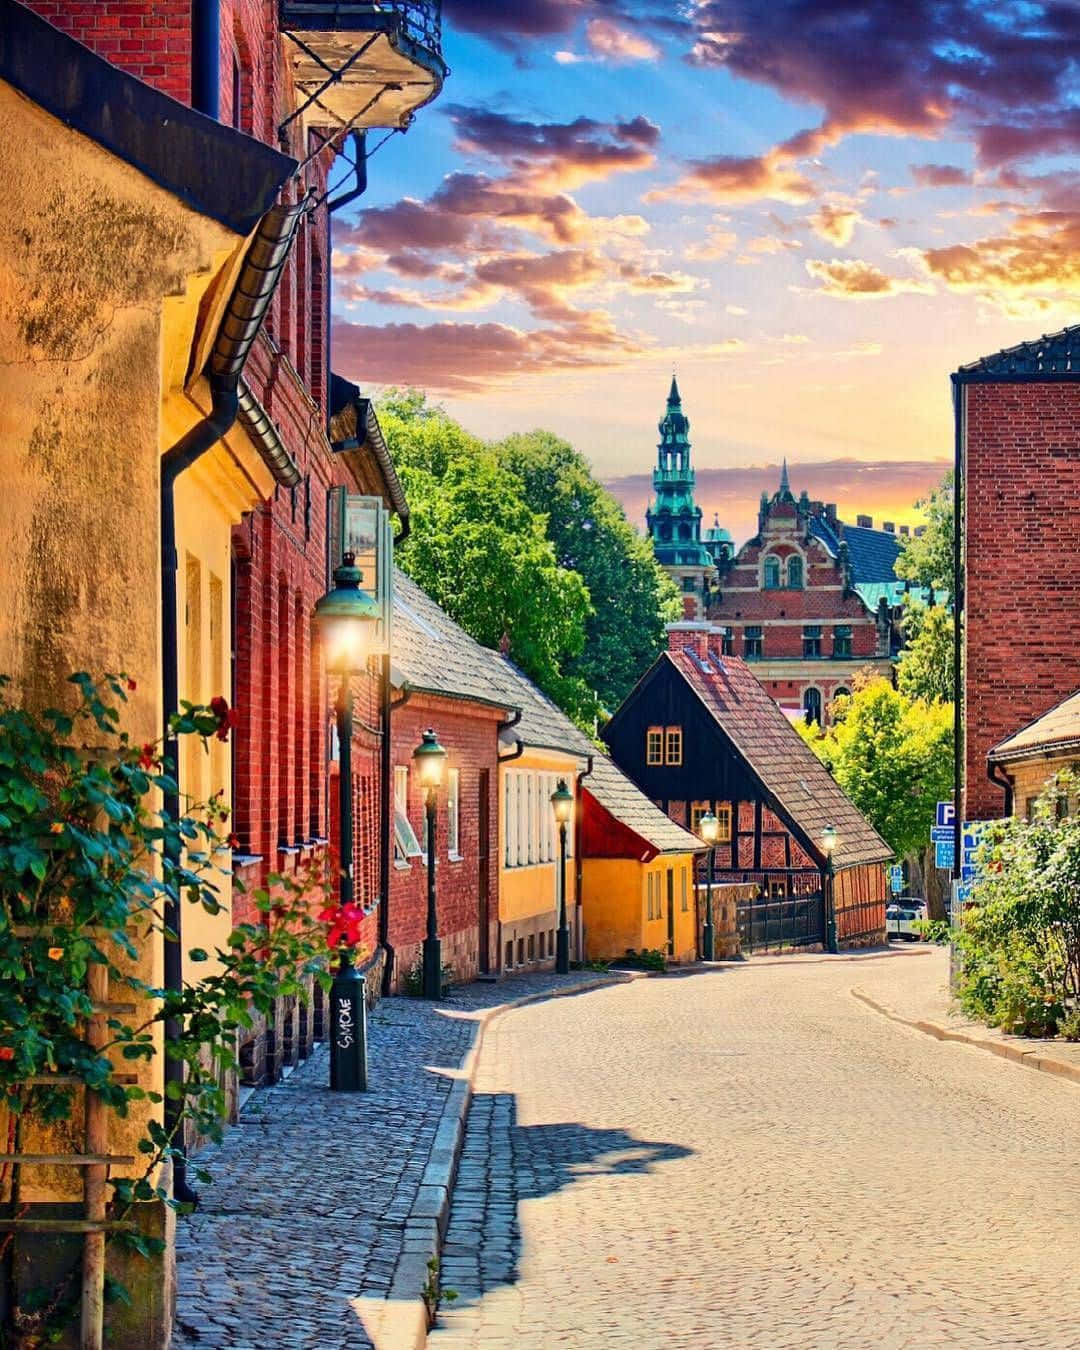 Charming View Of Historical Lund City, Sweden Wallpaper